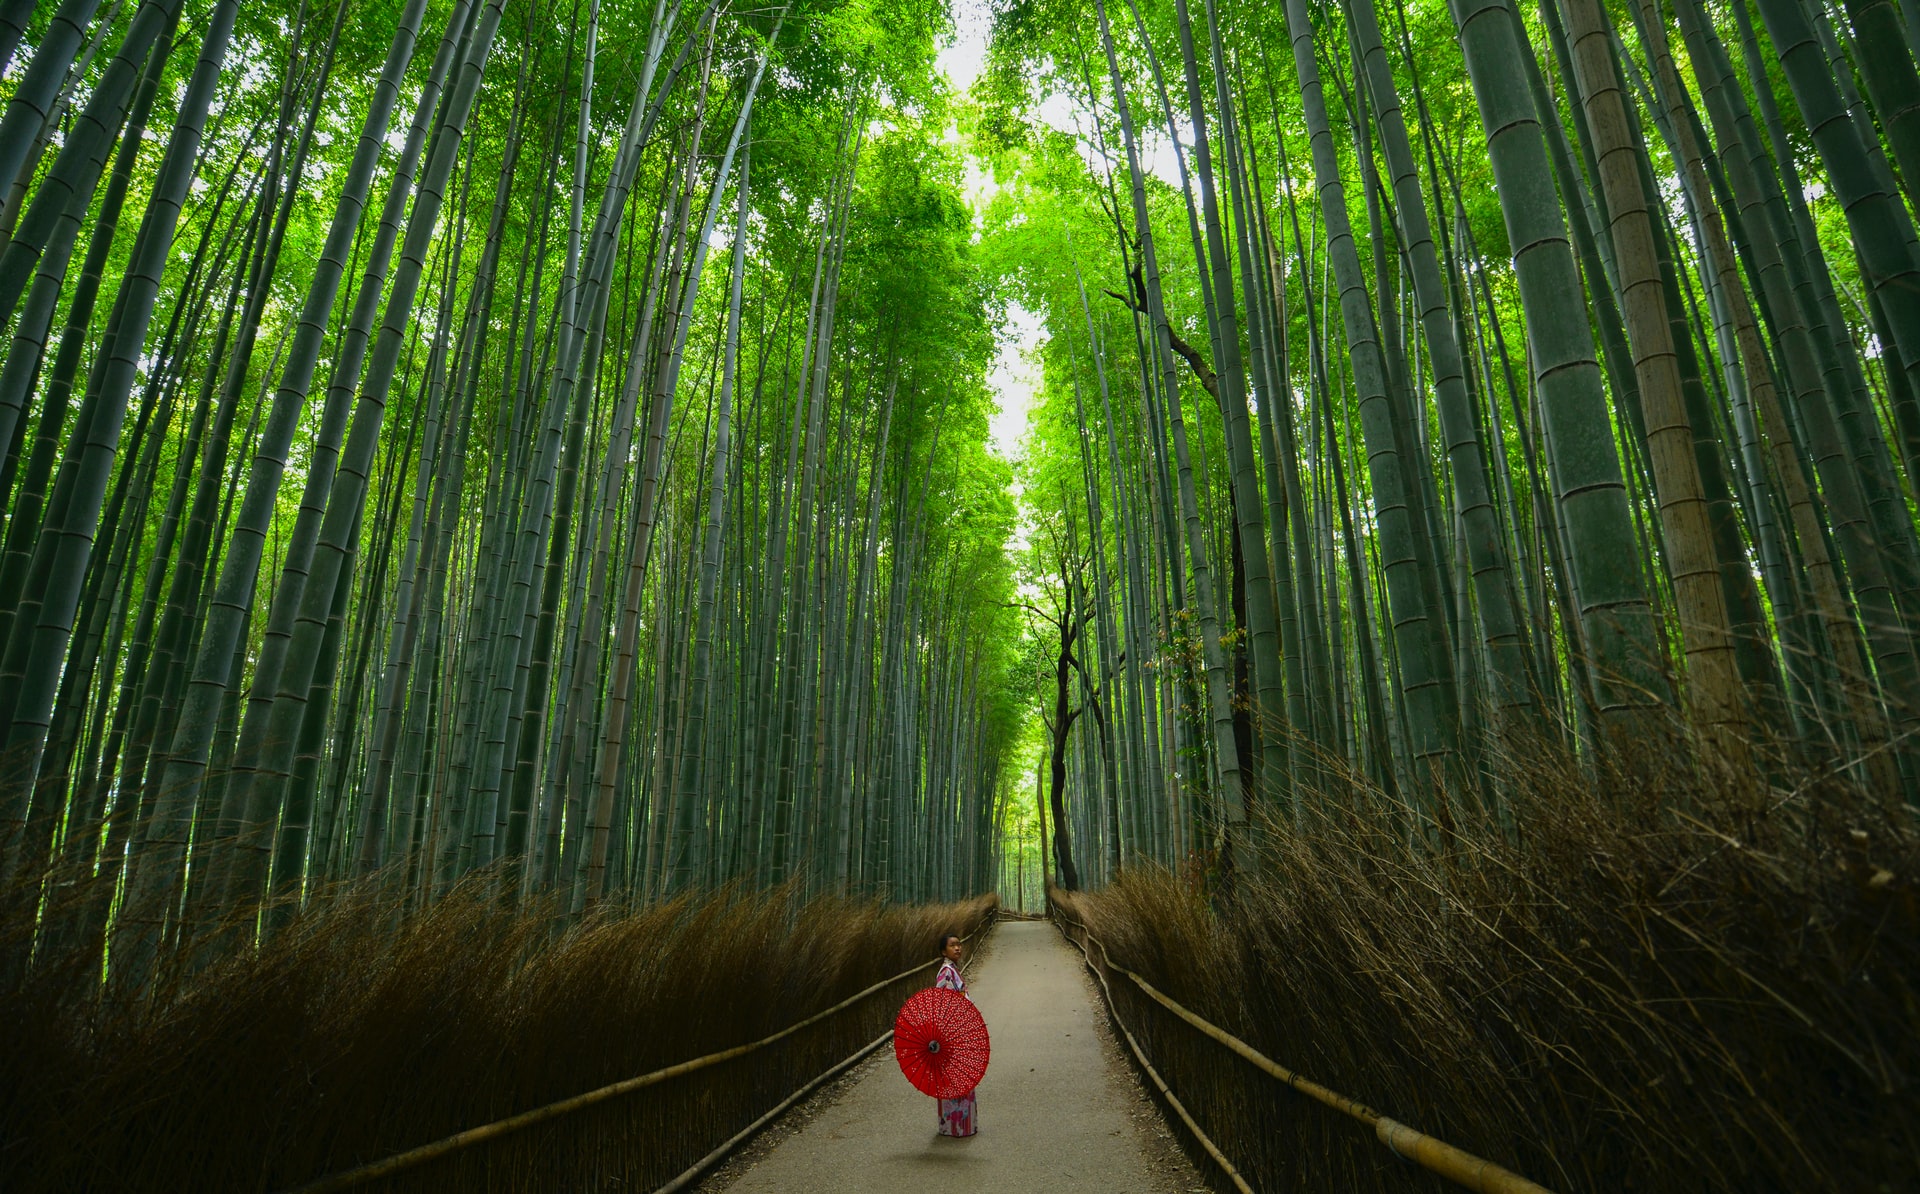 Female wearing traditional Japanese outfit with a red umbrella in the bamboo forest of Arashiyama in Kyoto